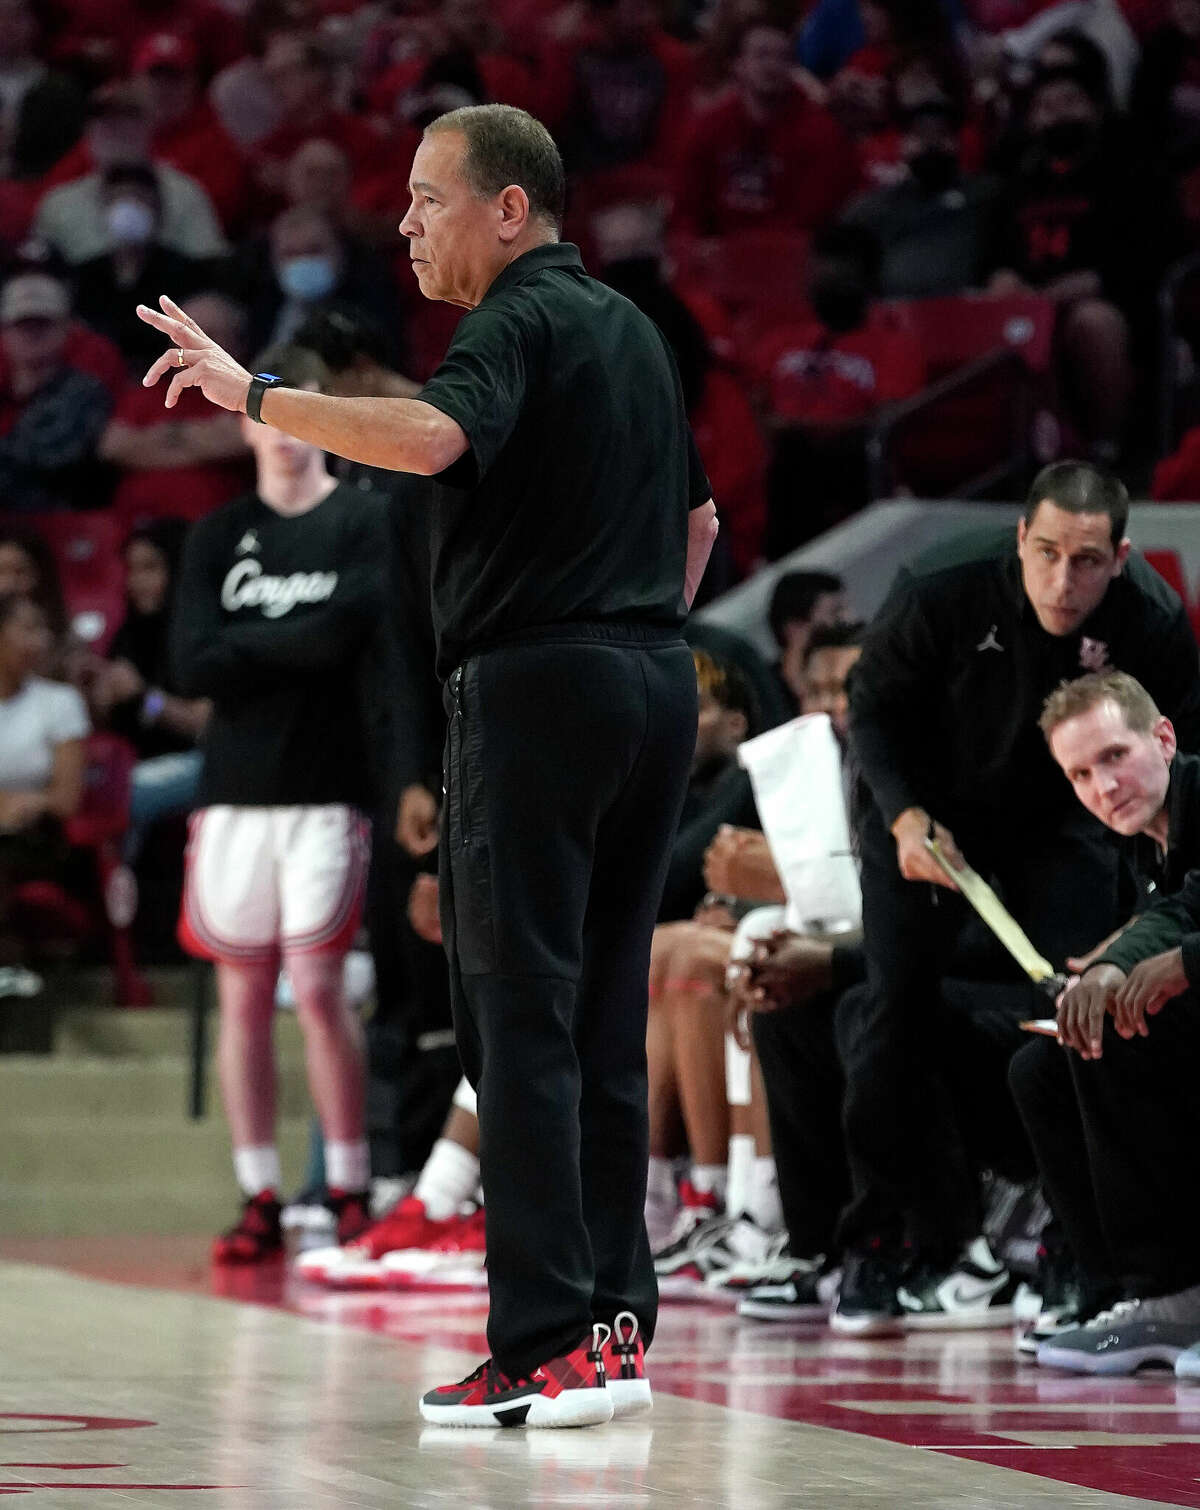 Houston Cougars head coach Kelvin Sampson during the first half of a men's NCAA basketball game at Fertitta Center on the University of Houston campus on Thursday, March 3, 2022 in Houston.